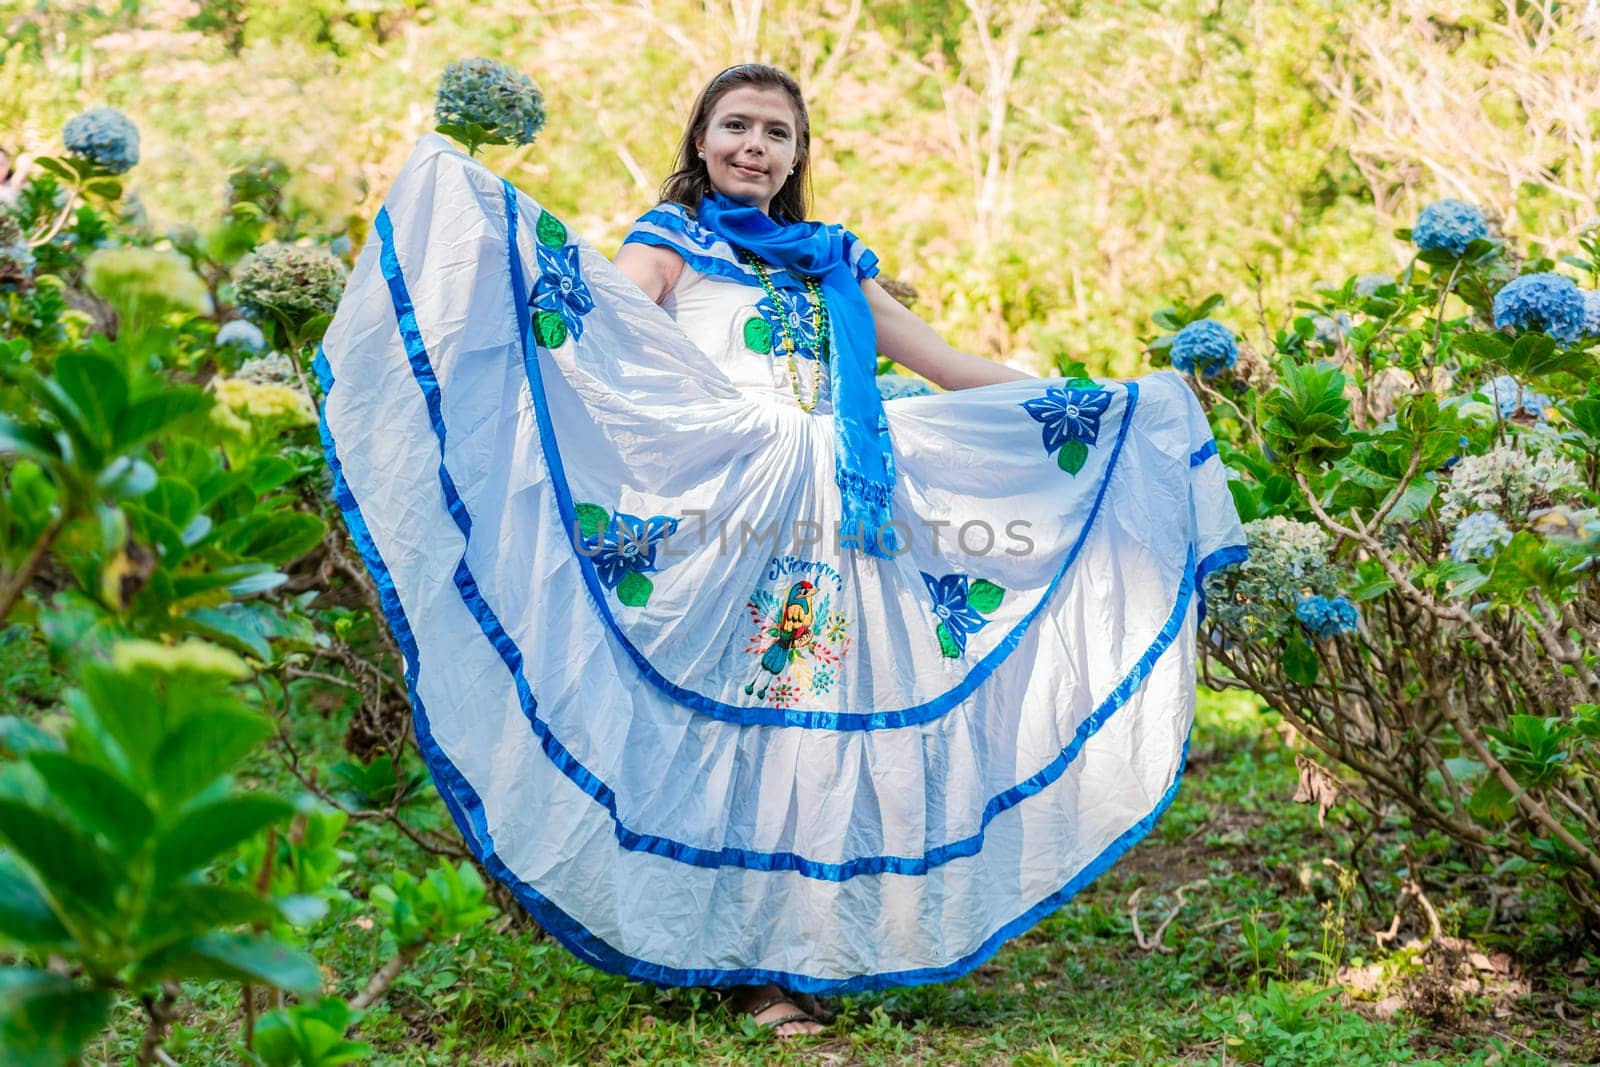 People in Nicaraguan national folk costume. Young Nicaraguan woman in traditional folk costume in a field of Milflores, Smiling woman in national folk costume in a field surrounded by flowers